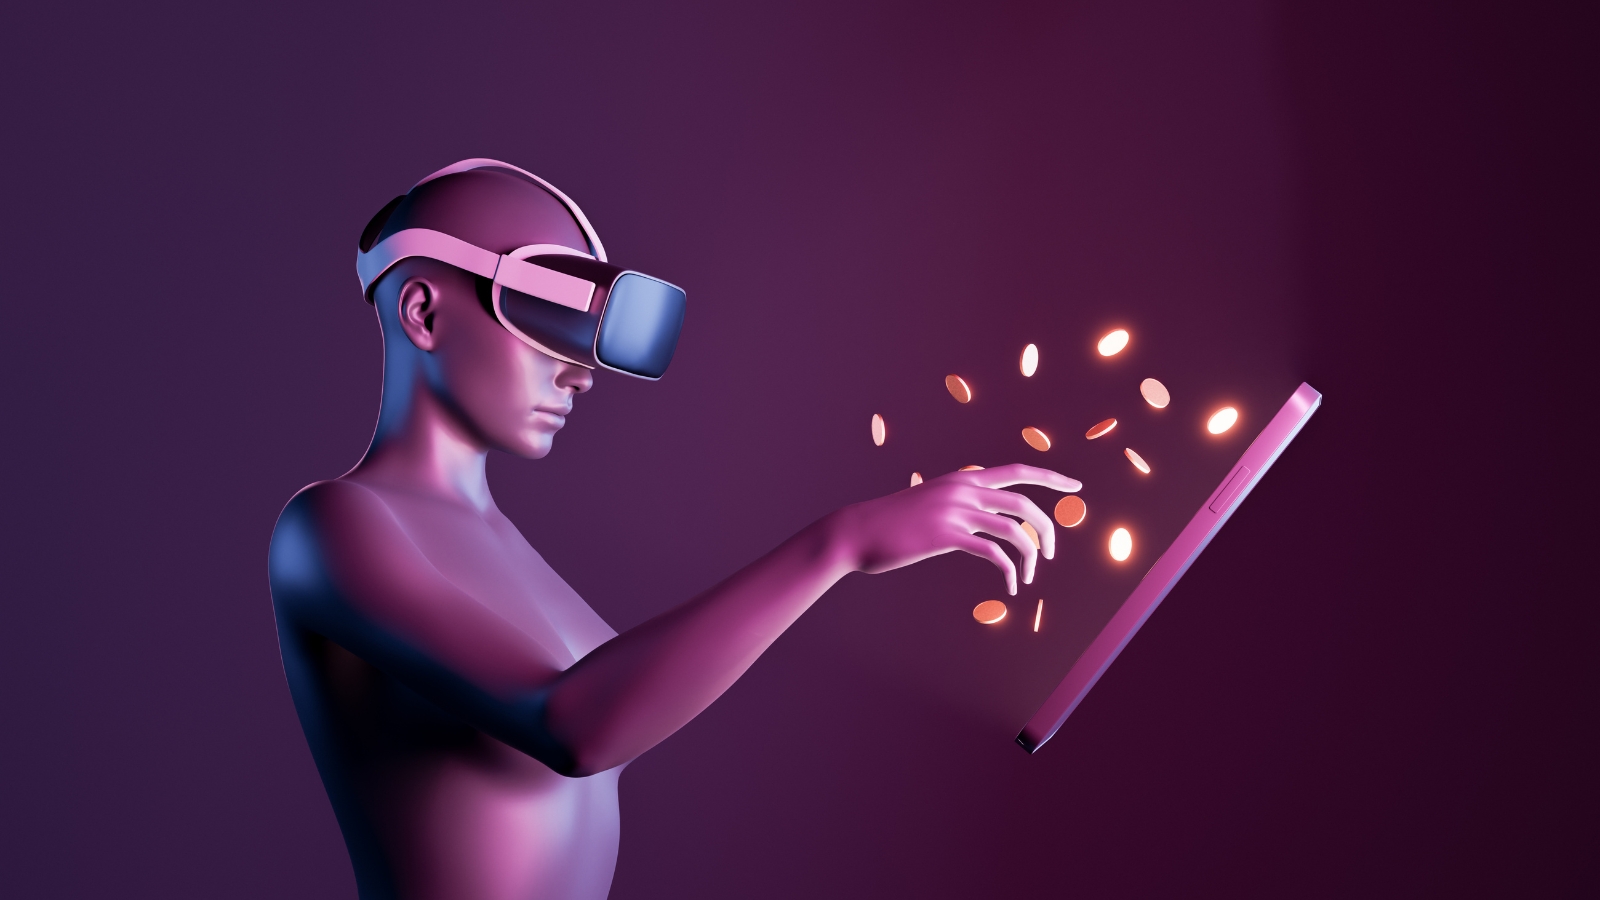 How Banks Can Enter the Metaverse with a Purpose